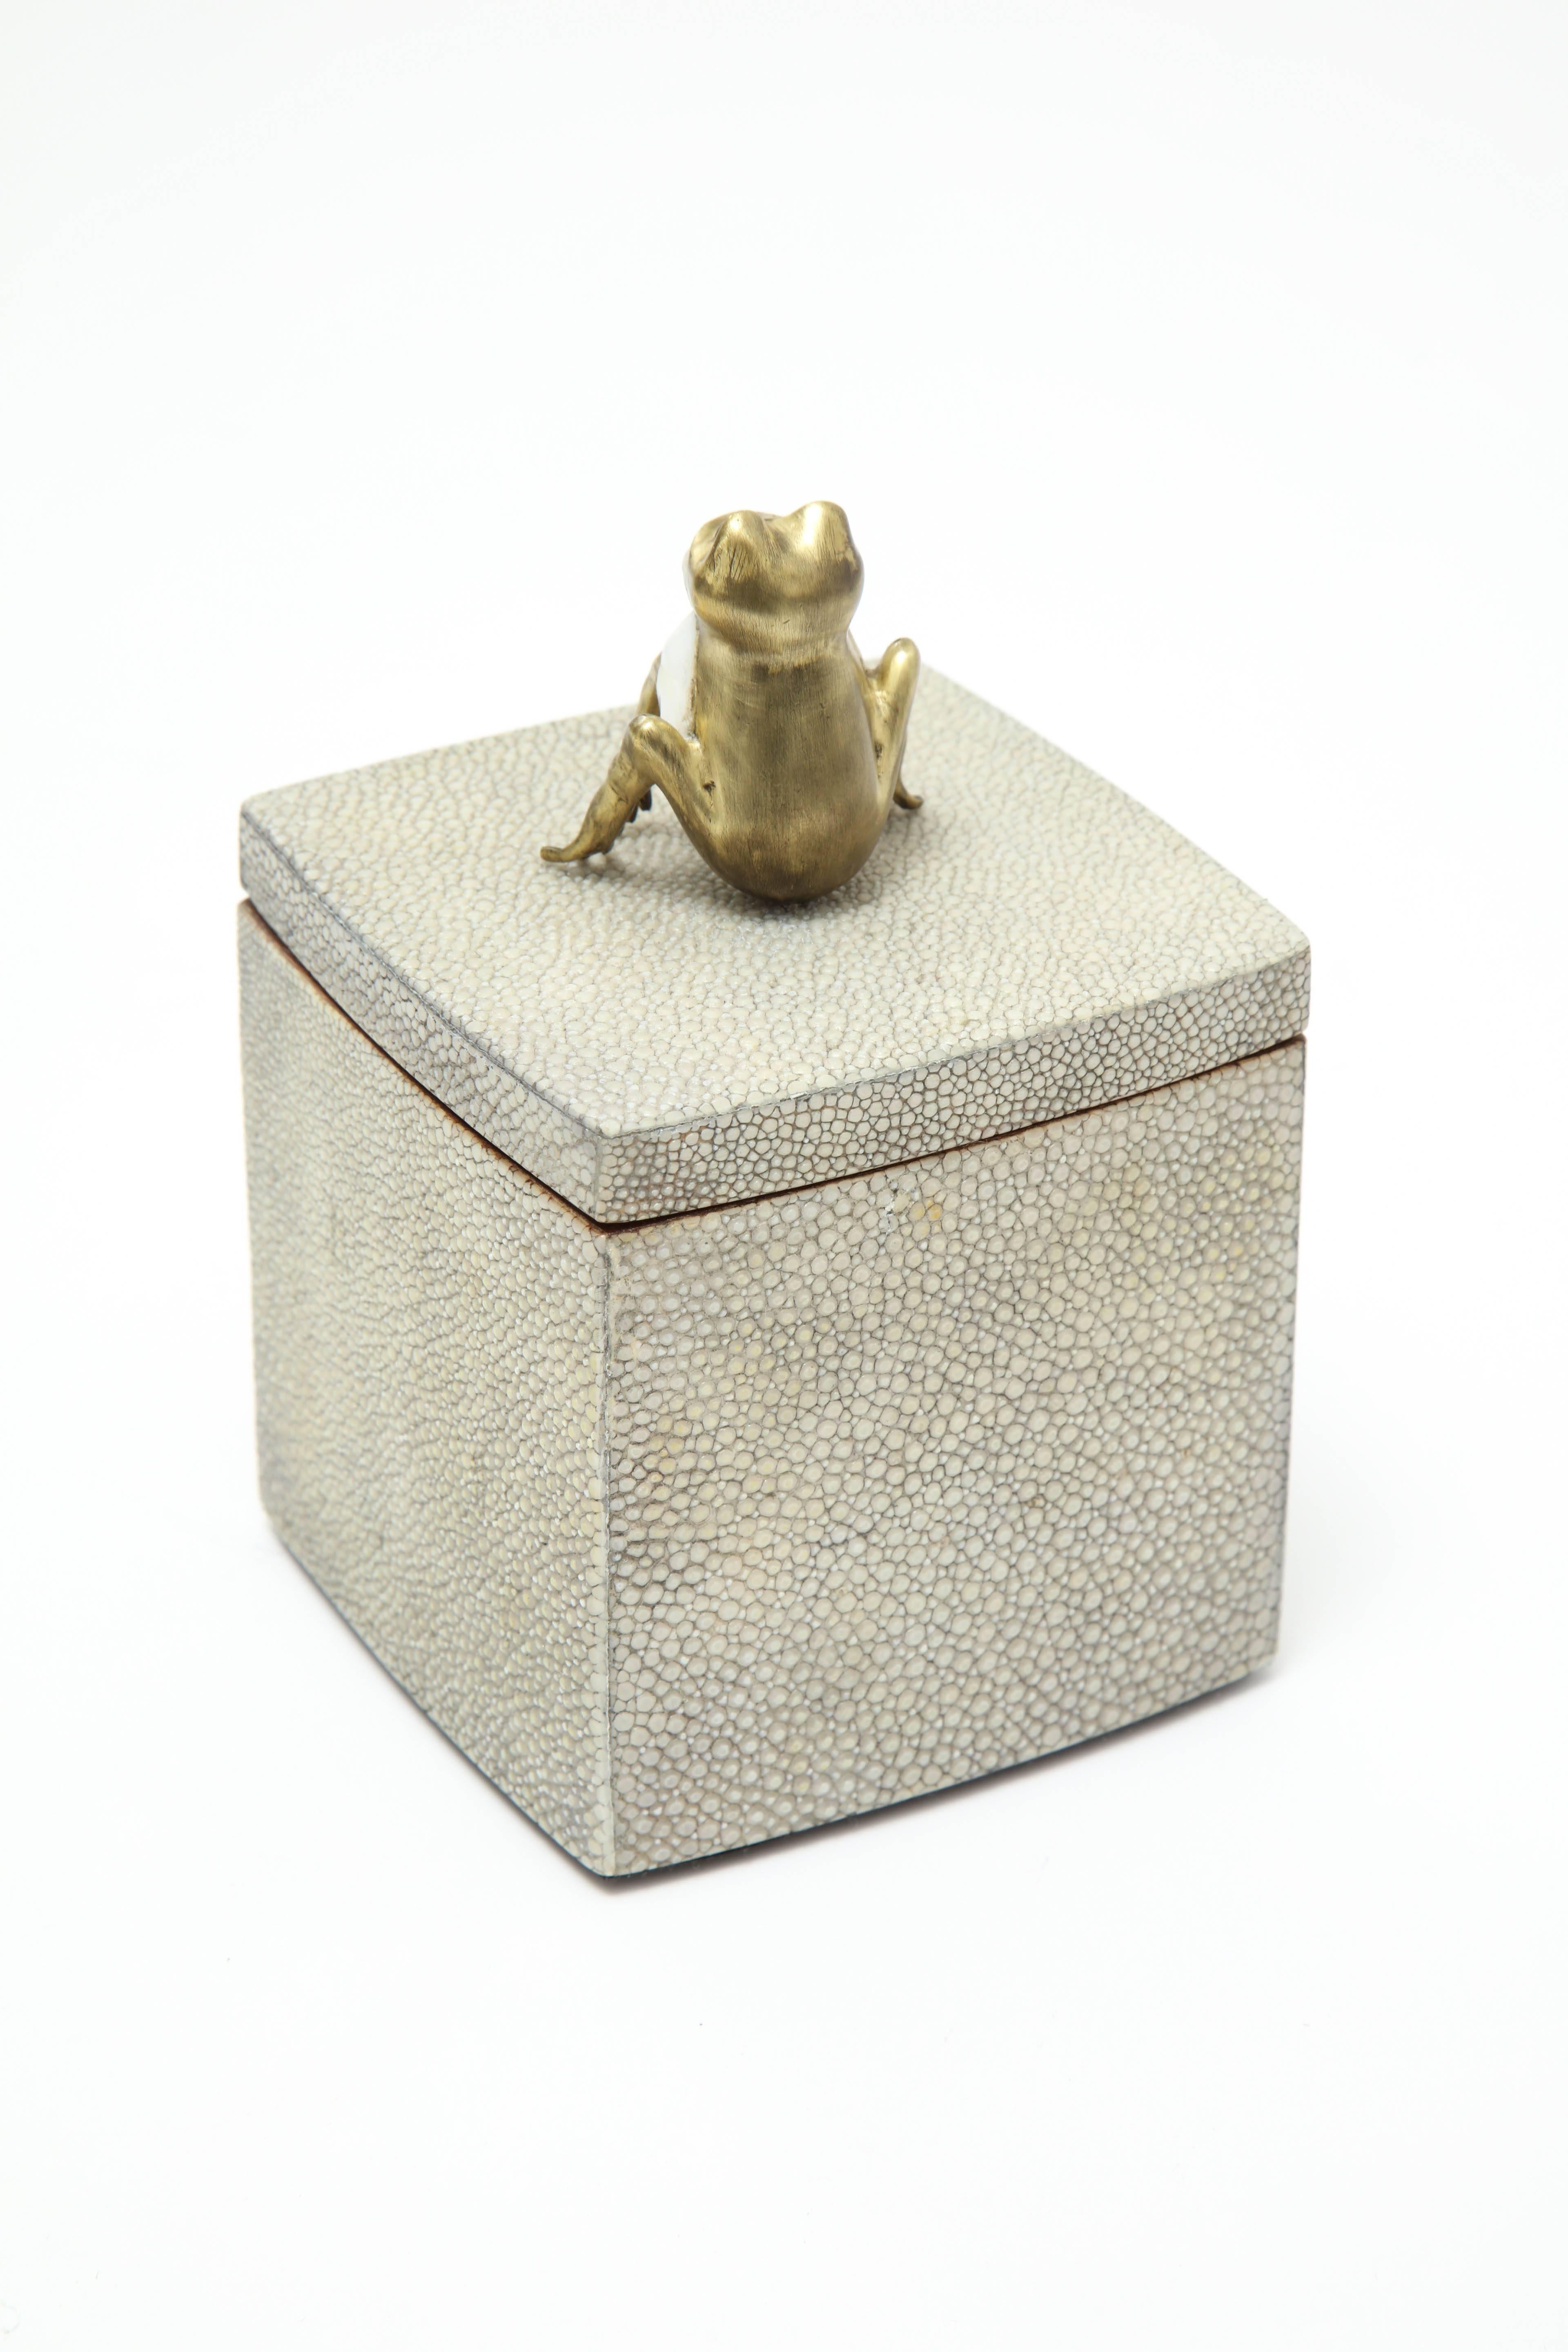 Hand-Crafted Shagreen Box with Decorative Frog 